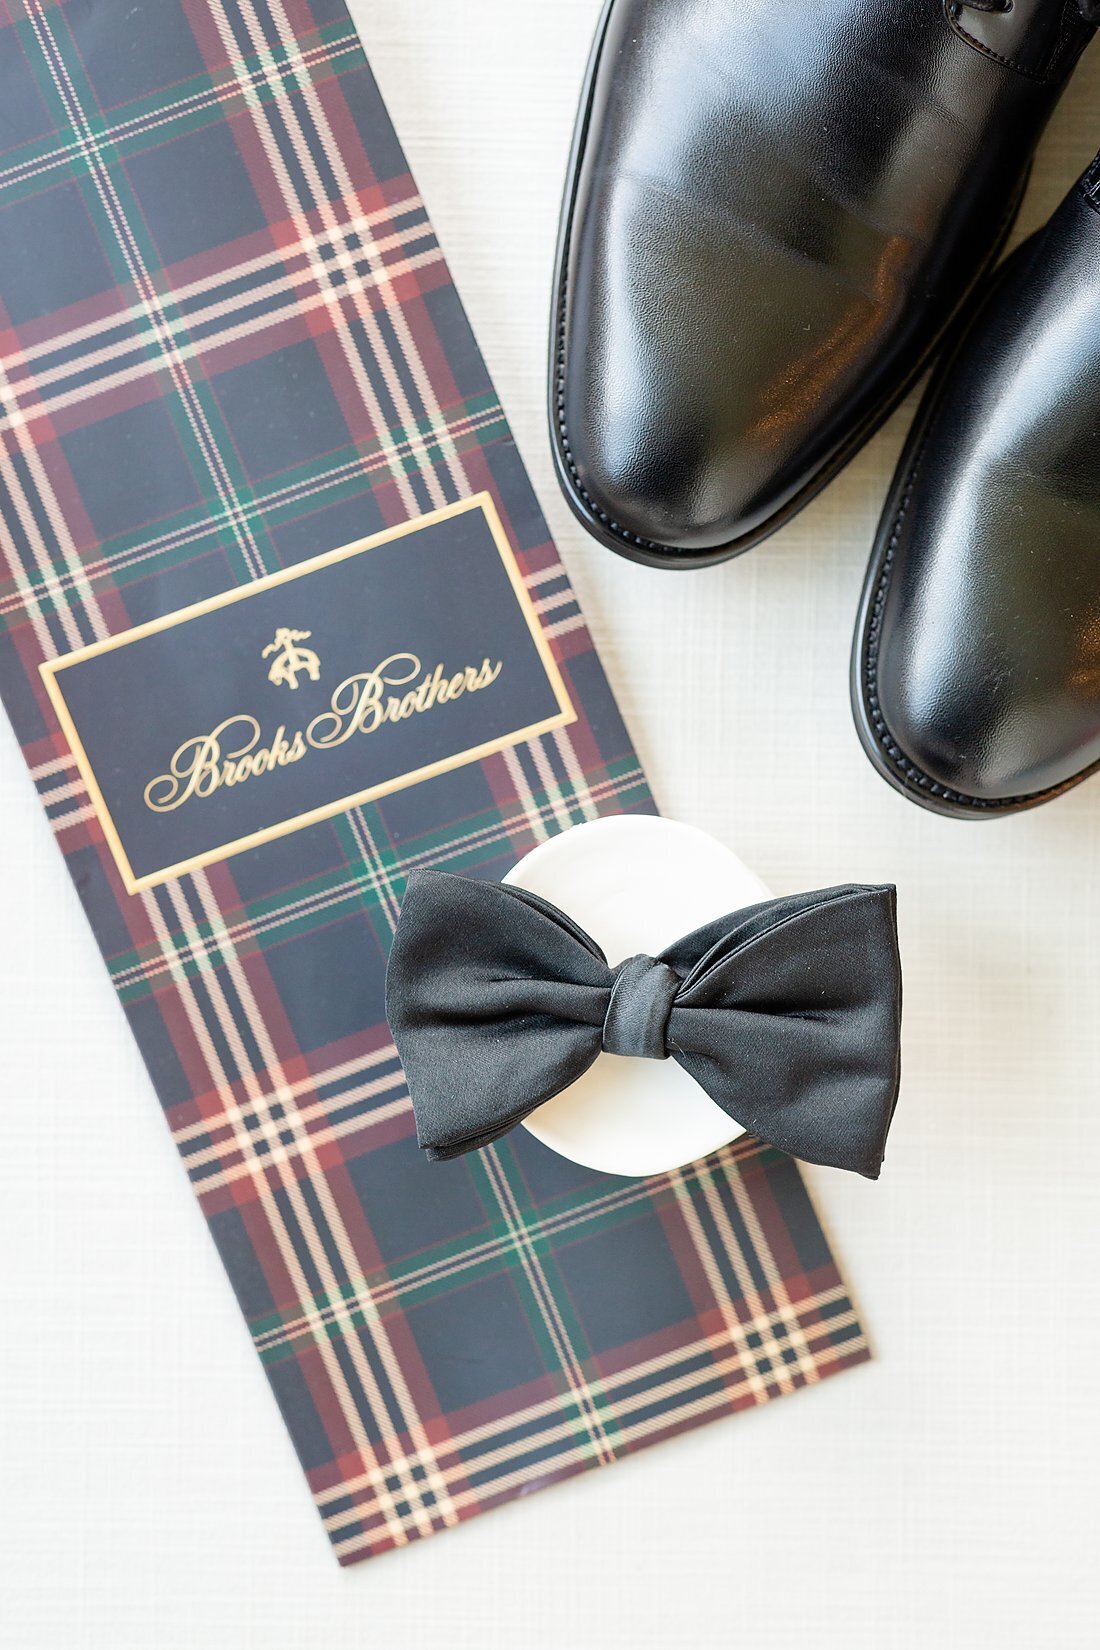 Brooks-brothers-bowtie-for-a-handsome-groom-in-london-ontario